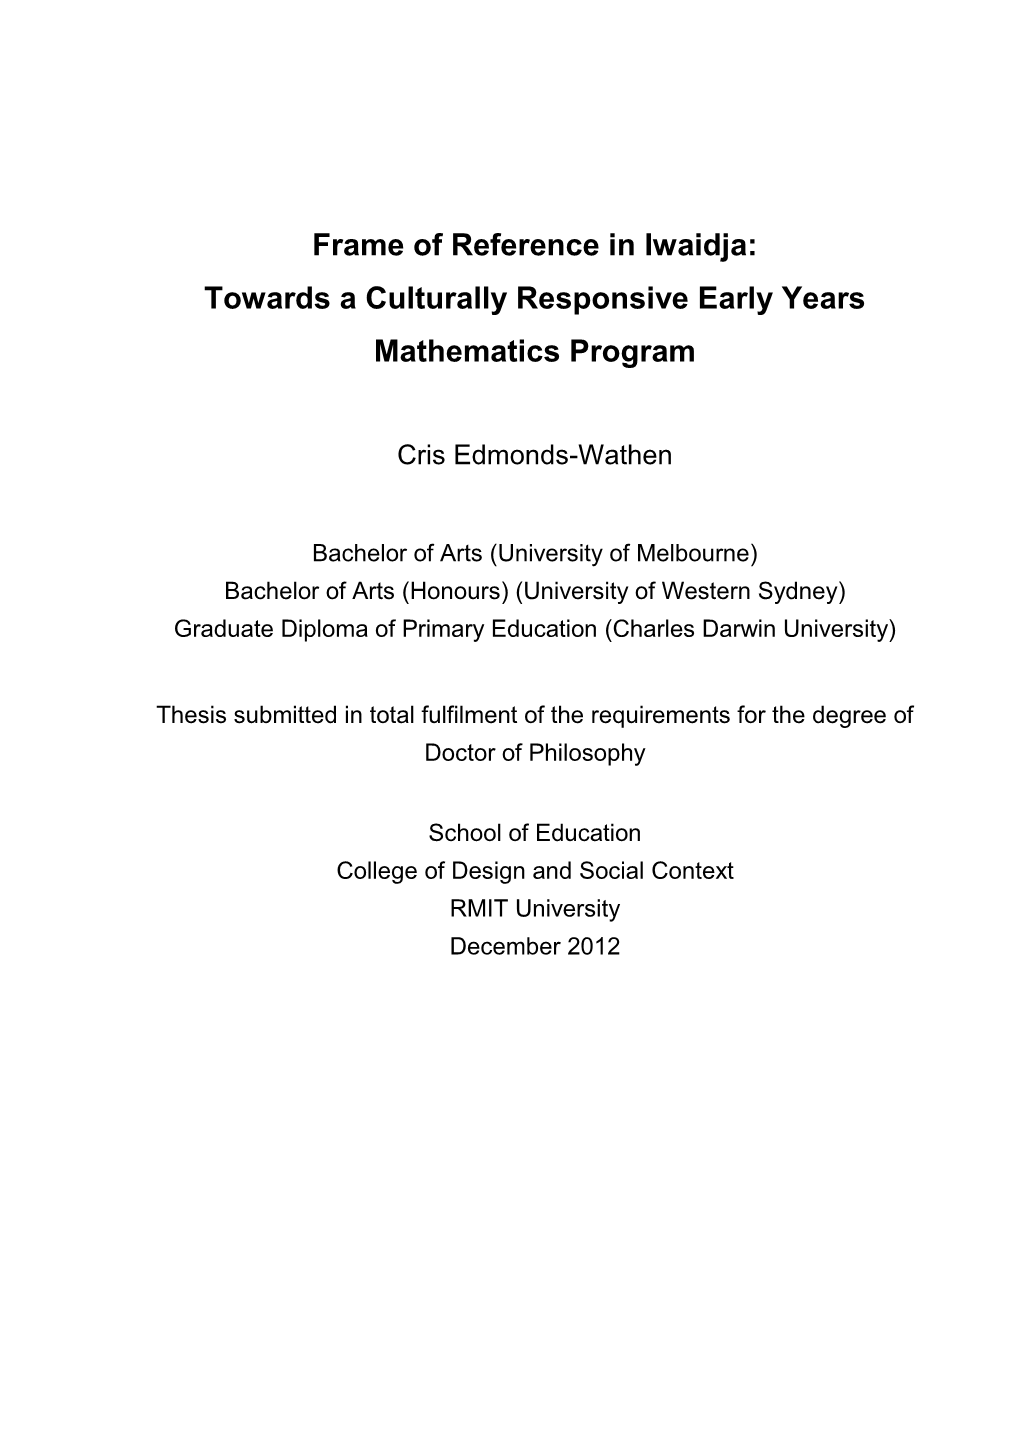 Frame of Reference in Iwaidja: Towards a Culturally Responsive Early Years Mathematics Program